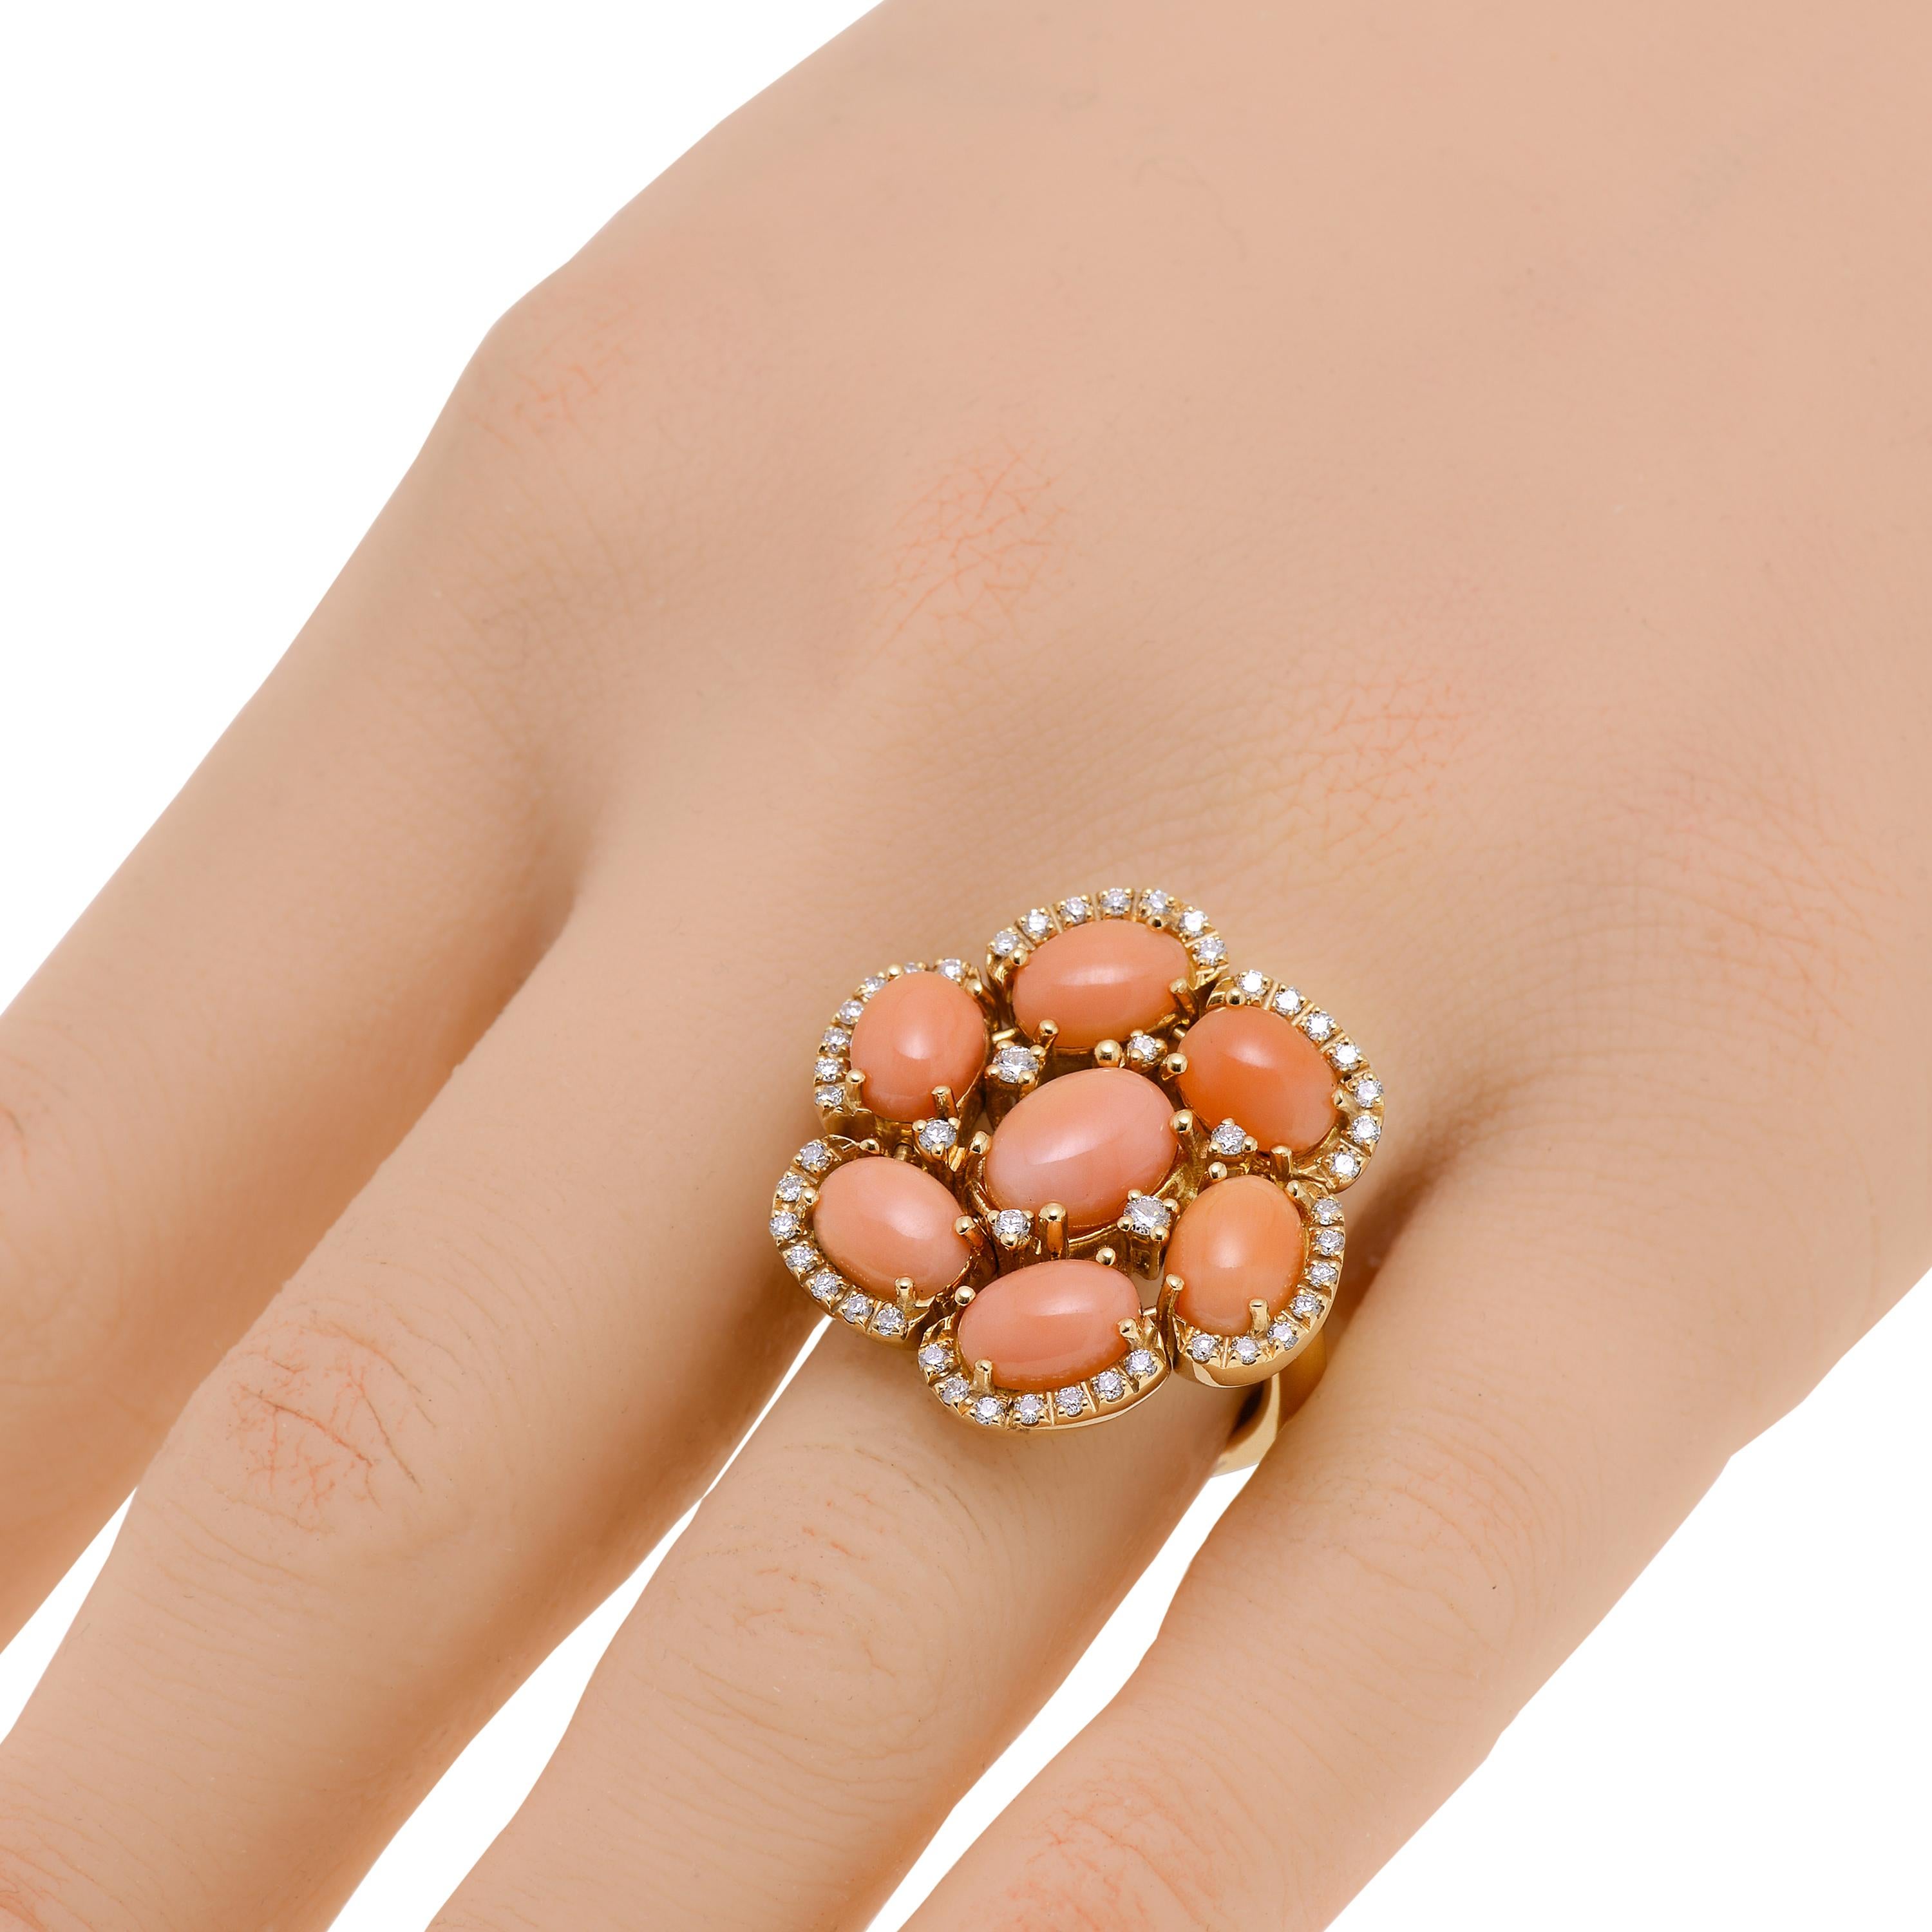 This bejeweled Zydo 18K Yellow Gold Statement Ring features seven festive Coral petals (3.37ct tw) enhanced with glimmering accent diamonds and pave (0.5ct twd). Sticking to company traditions since its foundation, Zydo Jewelry uses only the finest